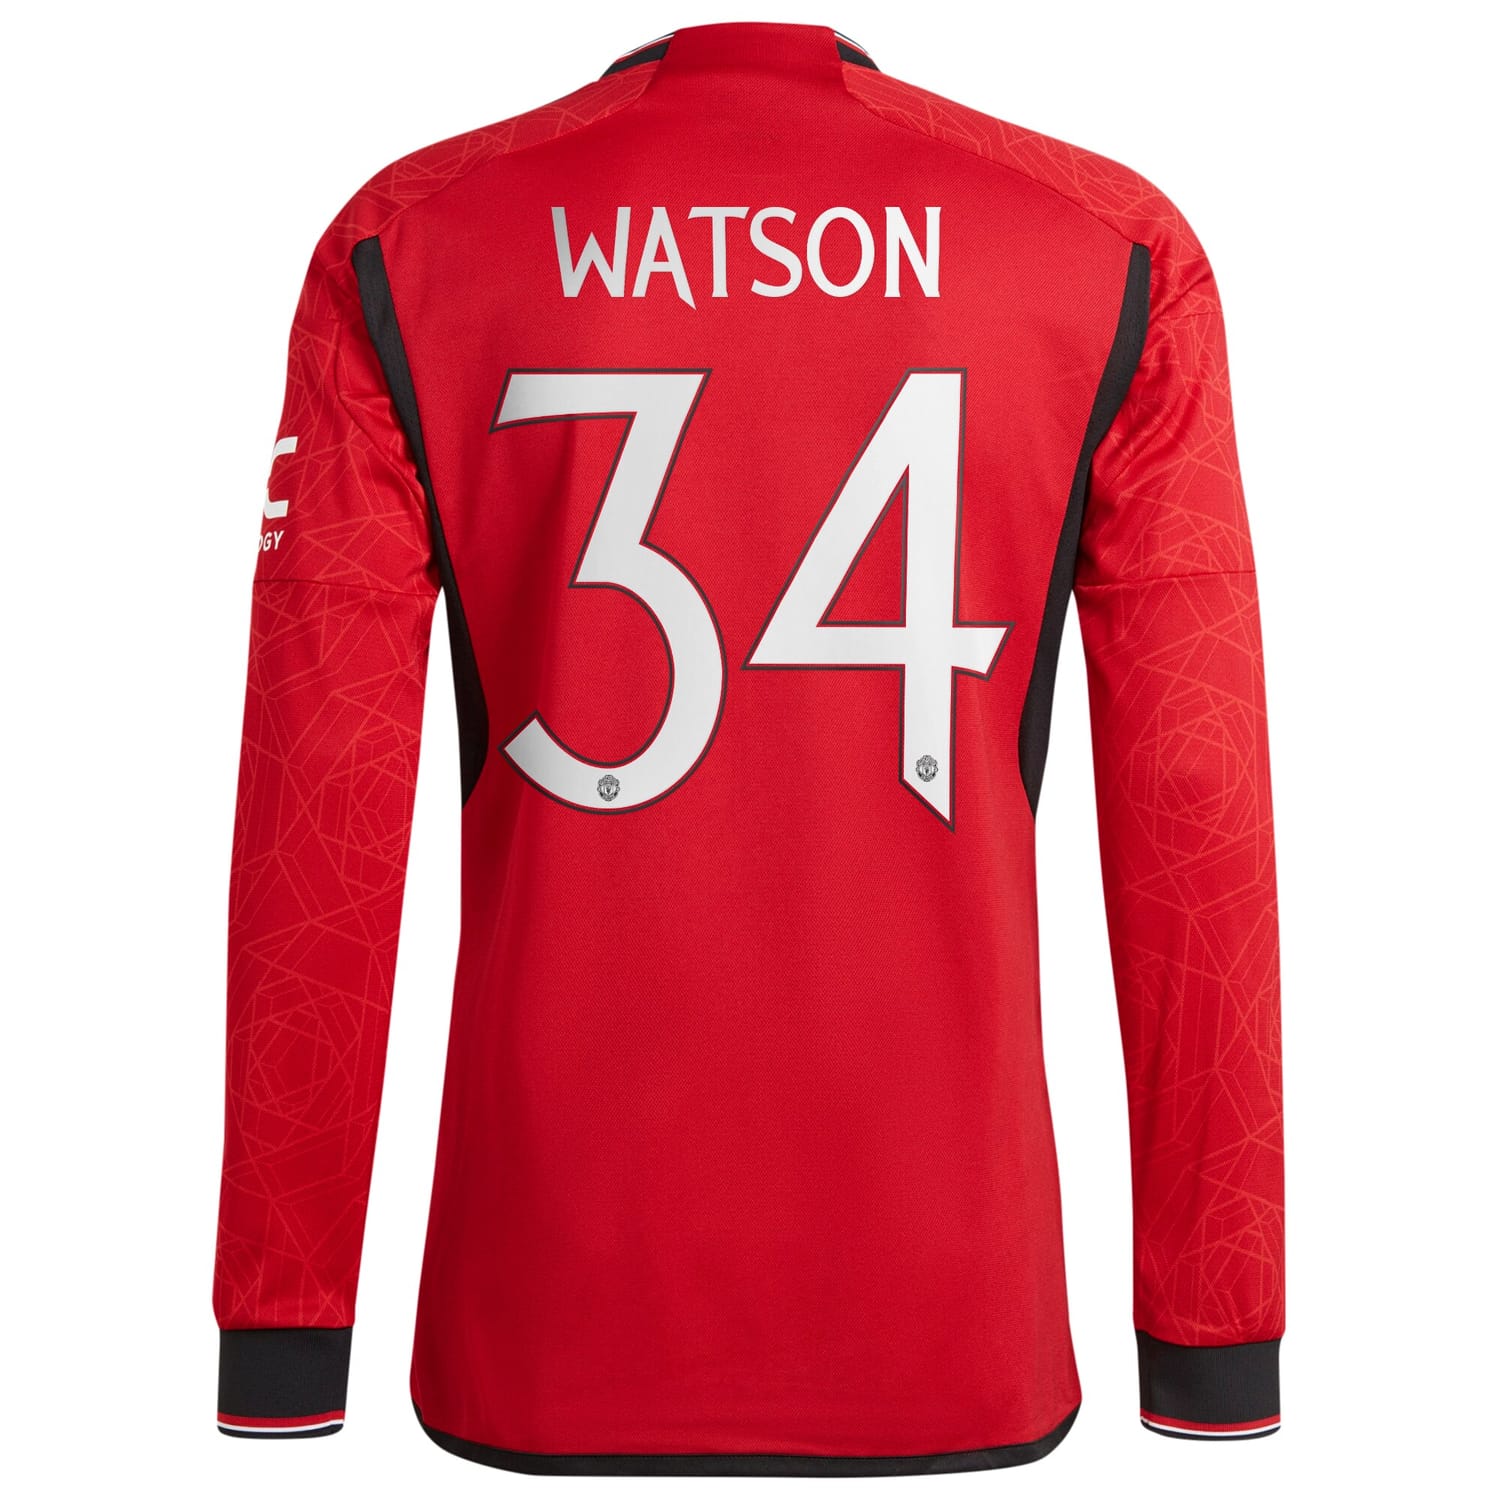 Premier League Manchester United Home Cup Authentic Jersey Shirt Long Sleeve 2023-24 player Emma Watson printing for Men